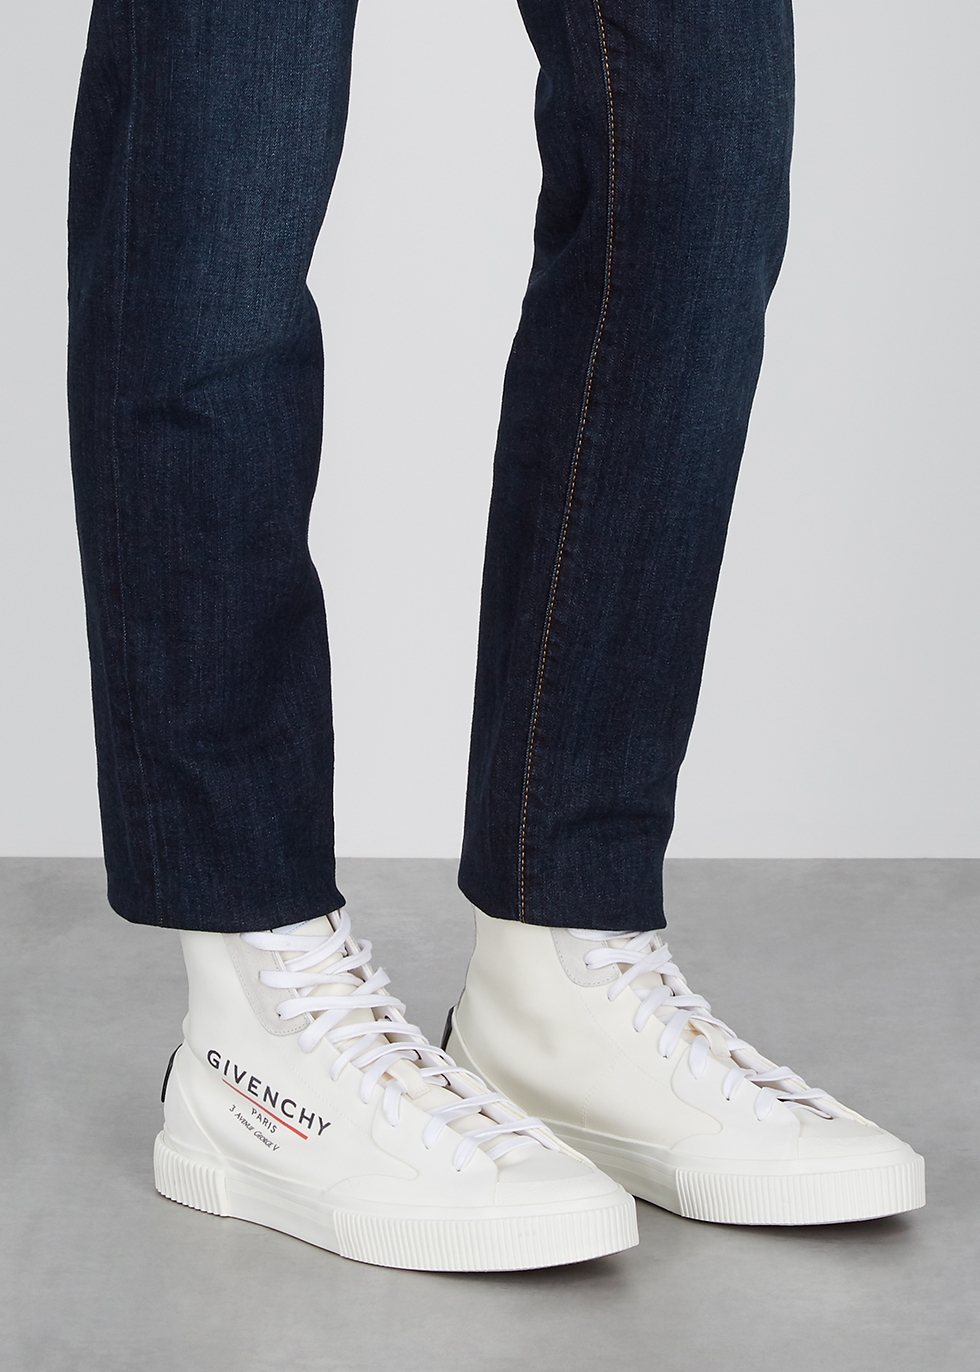 Givenchy Tennis off-white coated canvas 